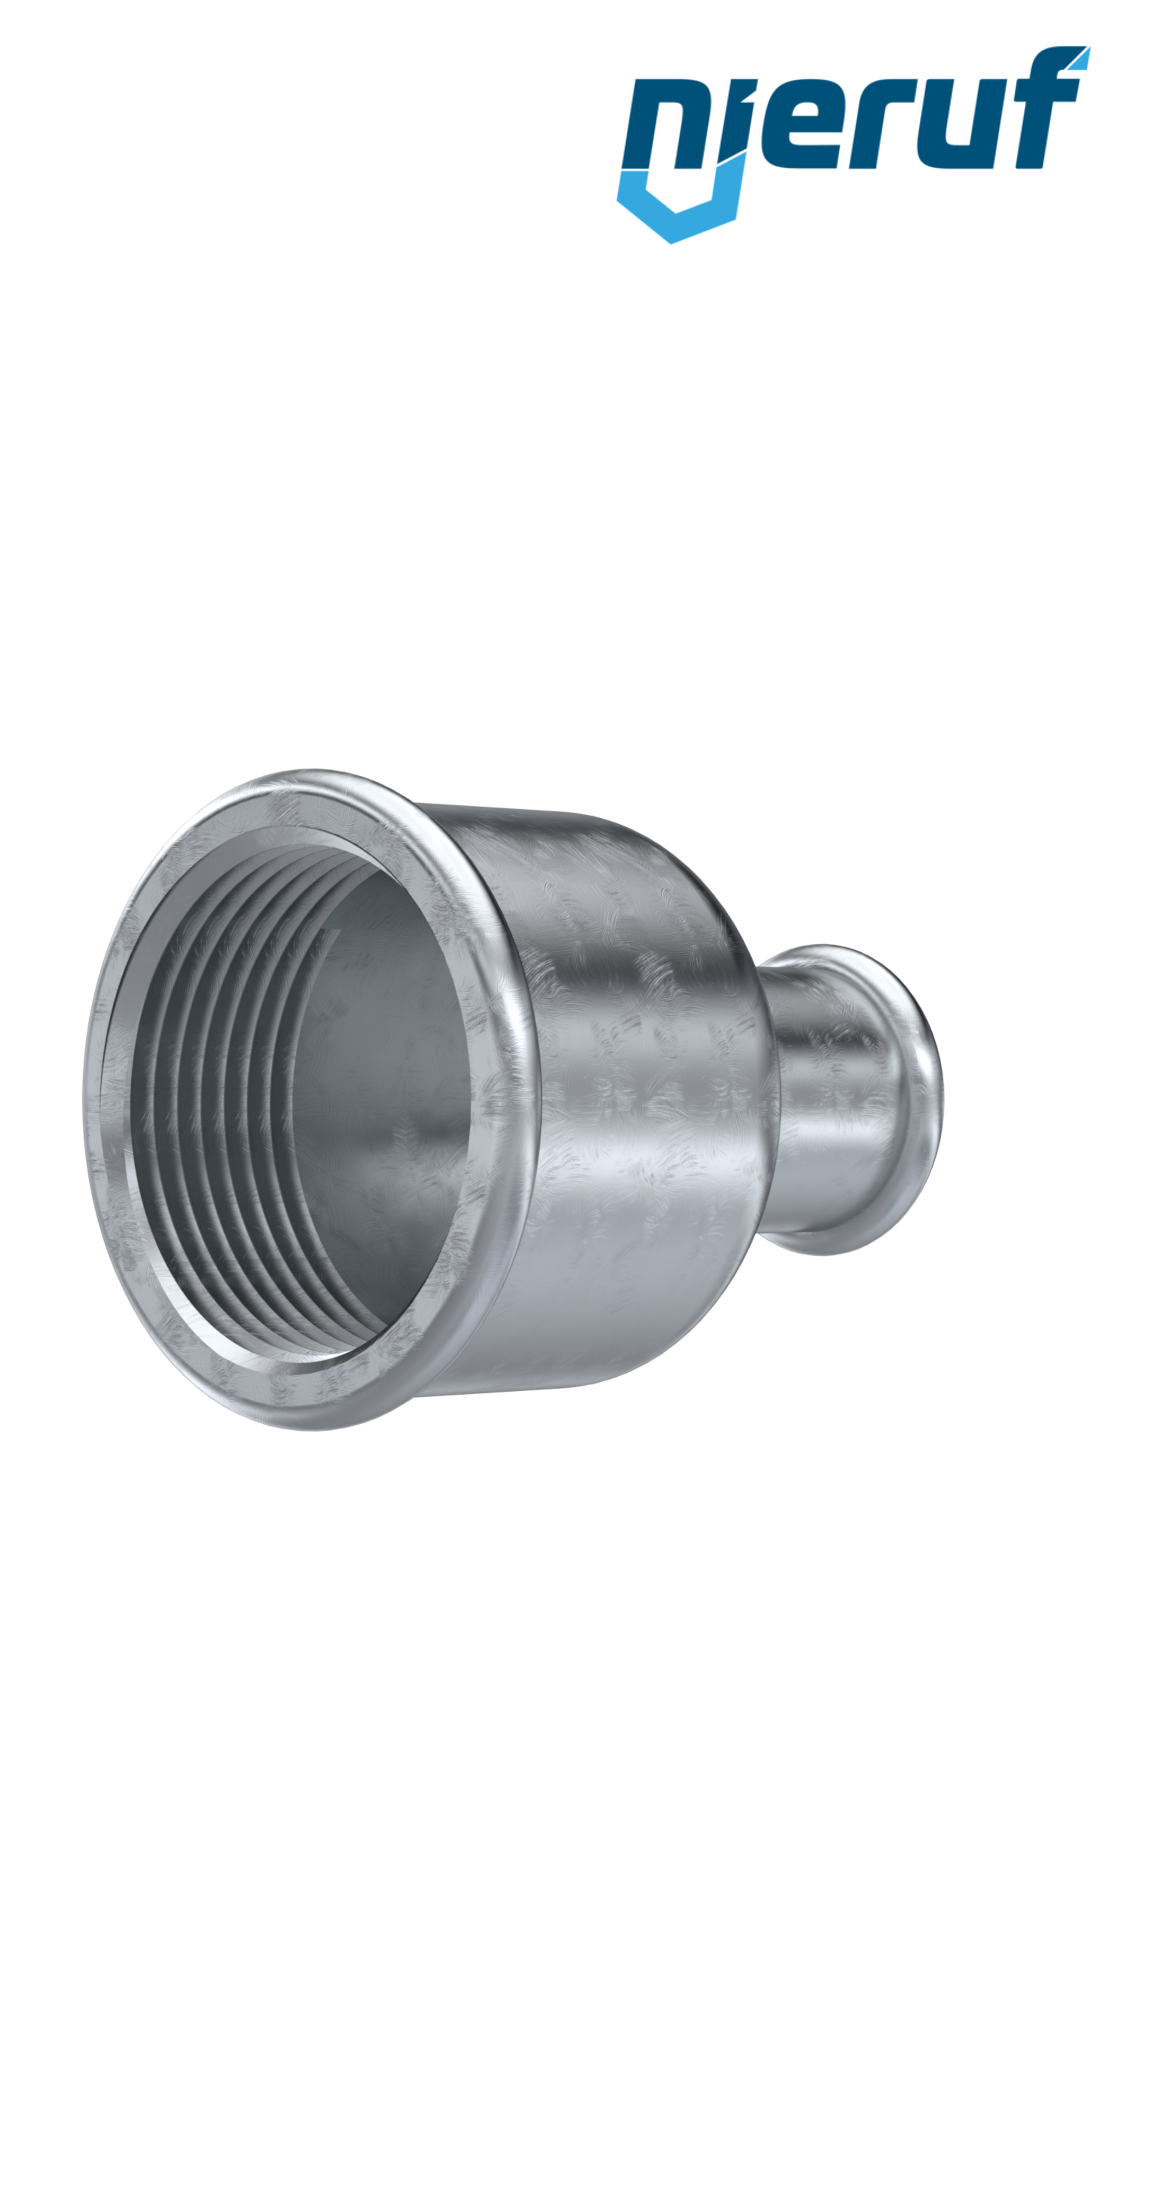 Malleable cast iron fitting reducing socket no. 240, 3/4" x 3/8" inch galvanized